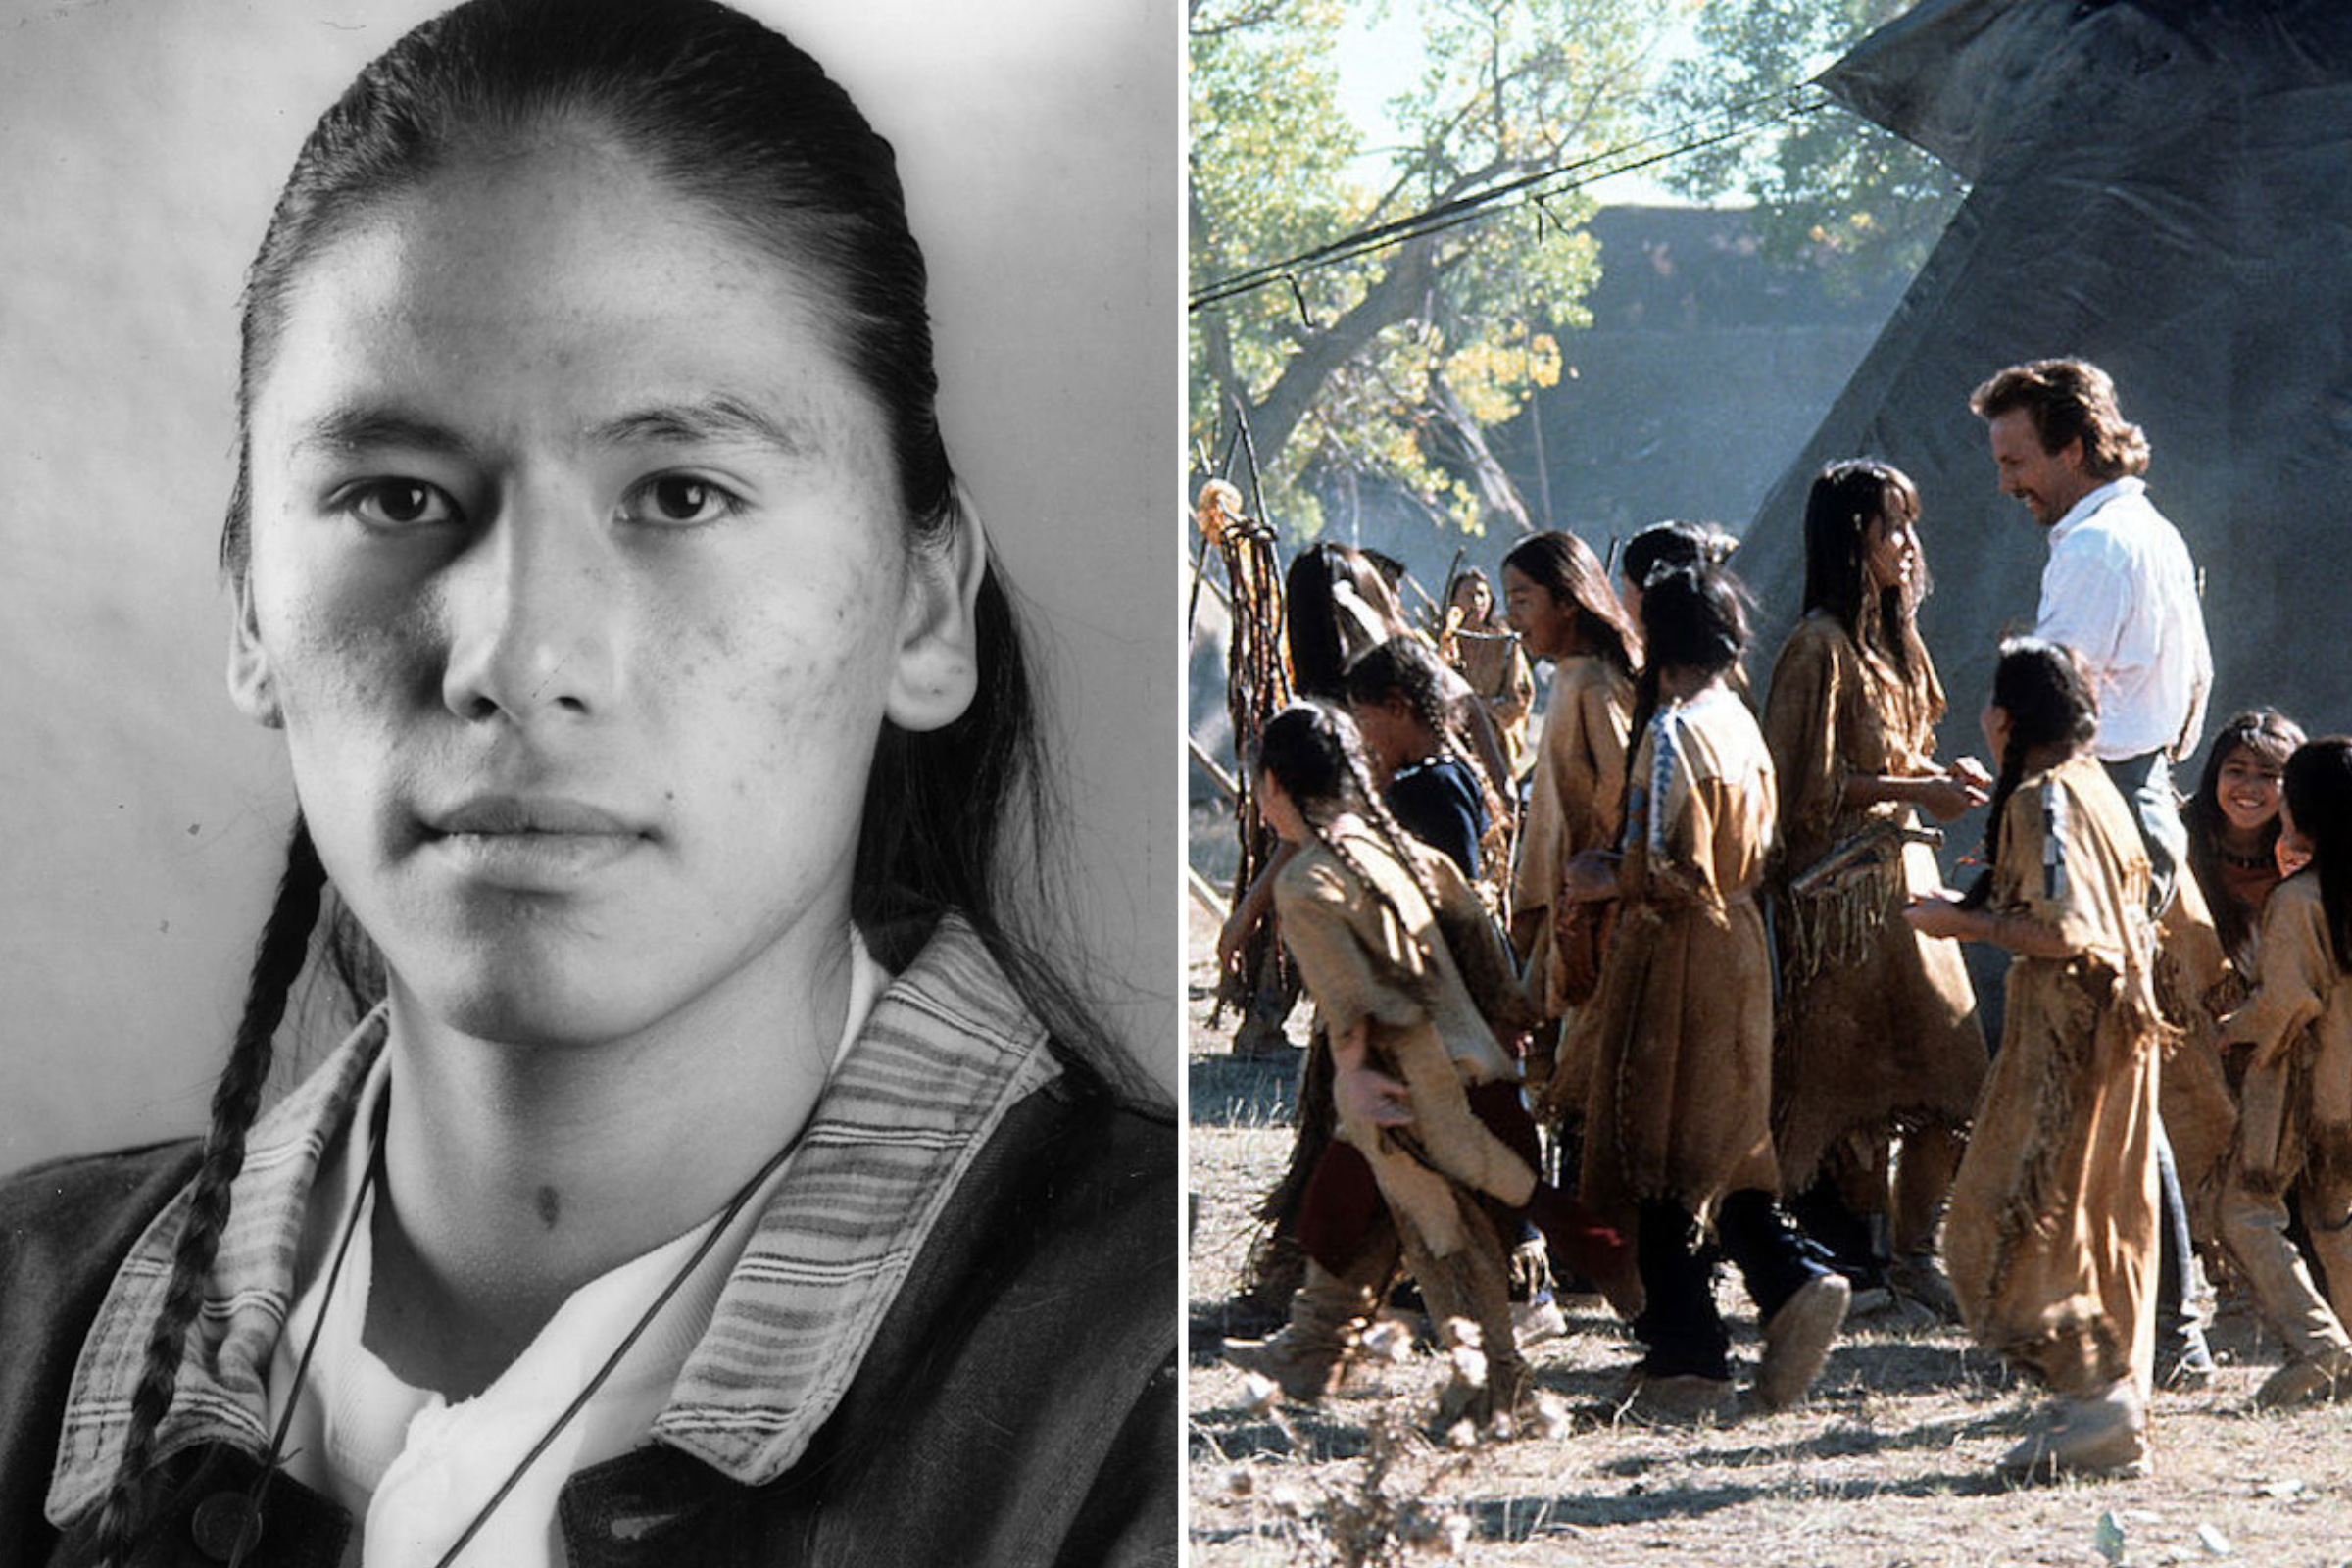 Who Is Nathan Lee Chasing His Horse? Charges Facing Native American Actor